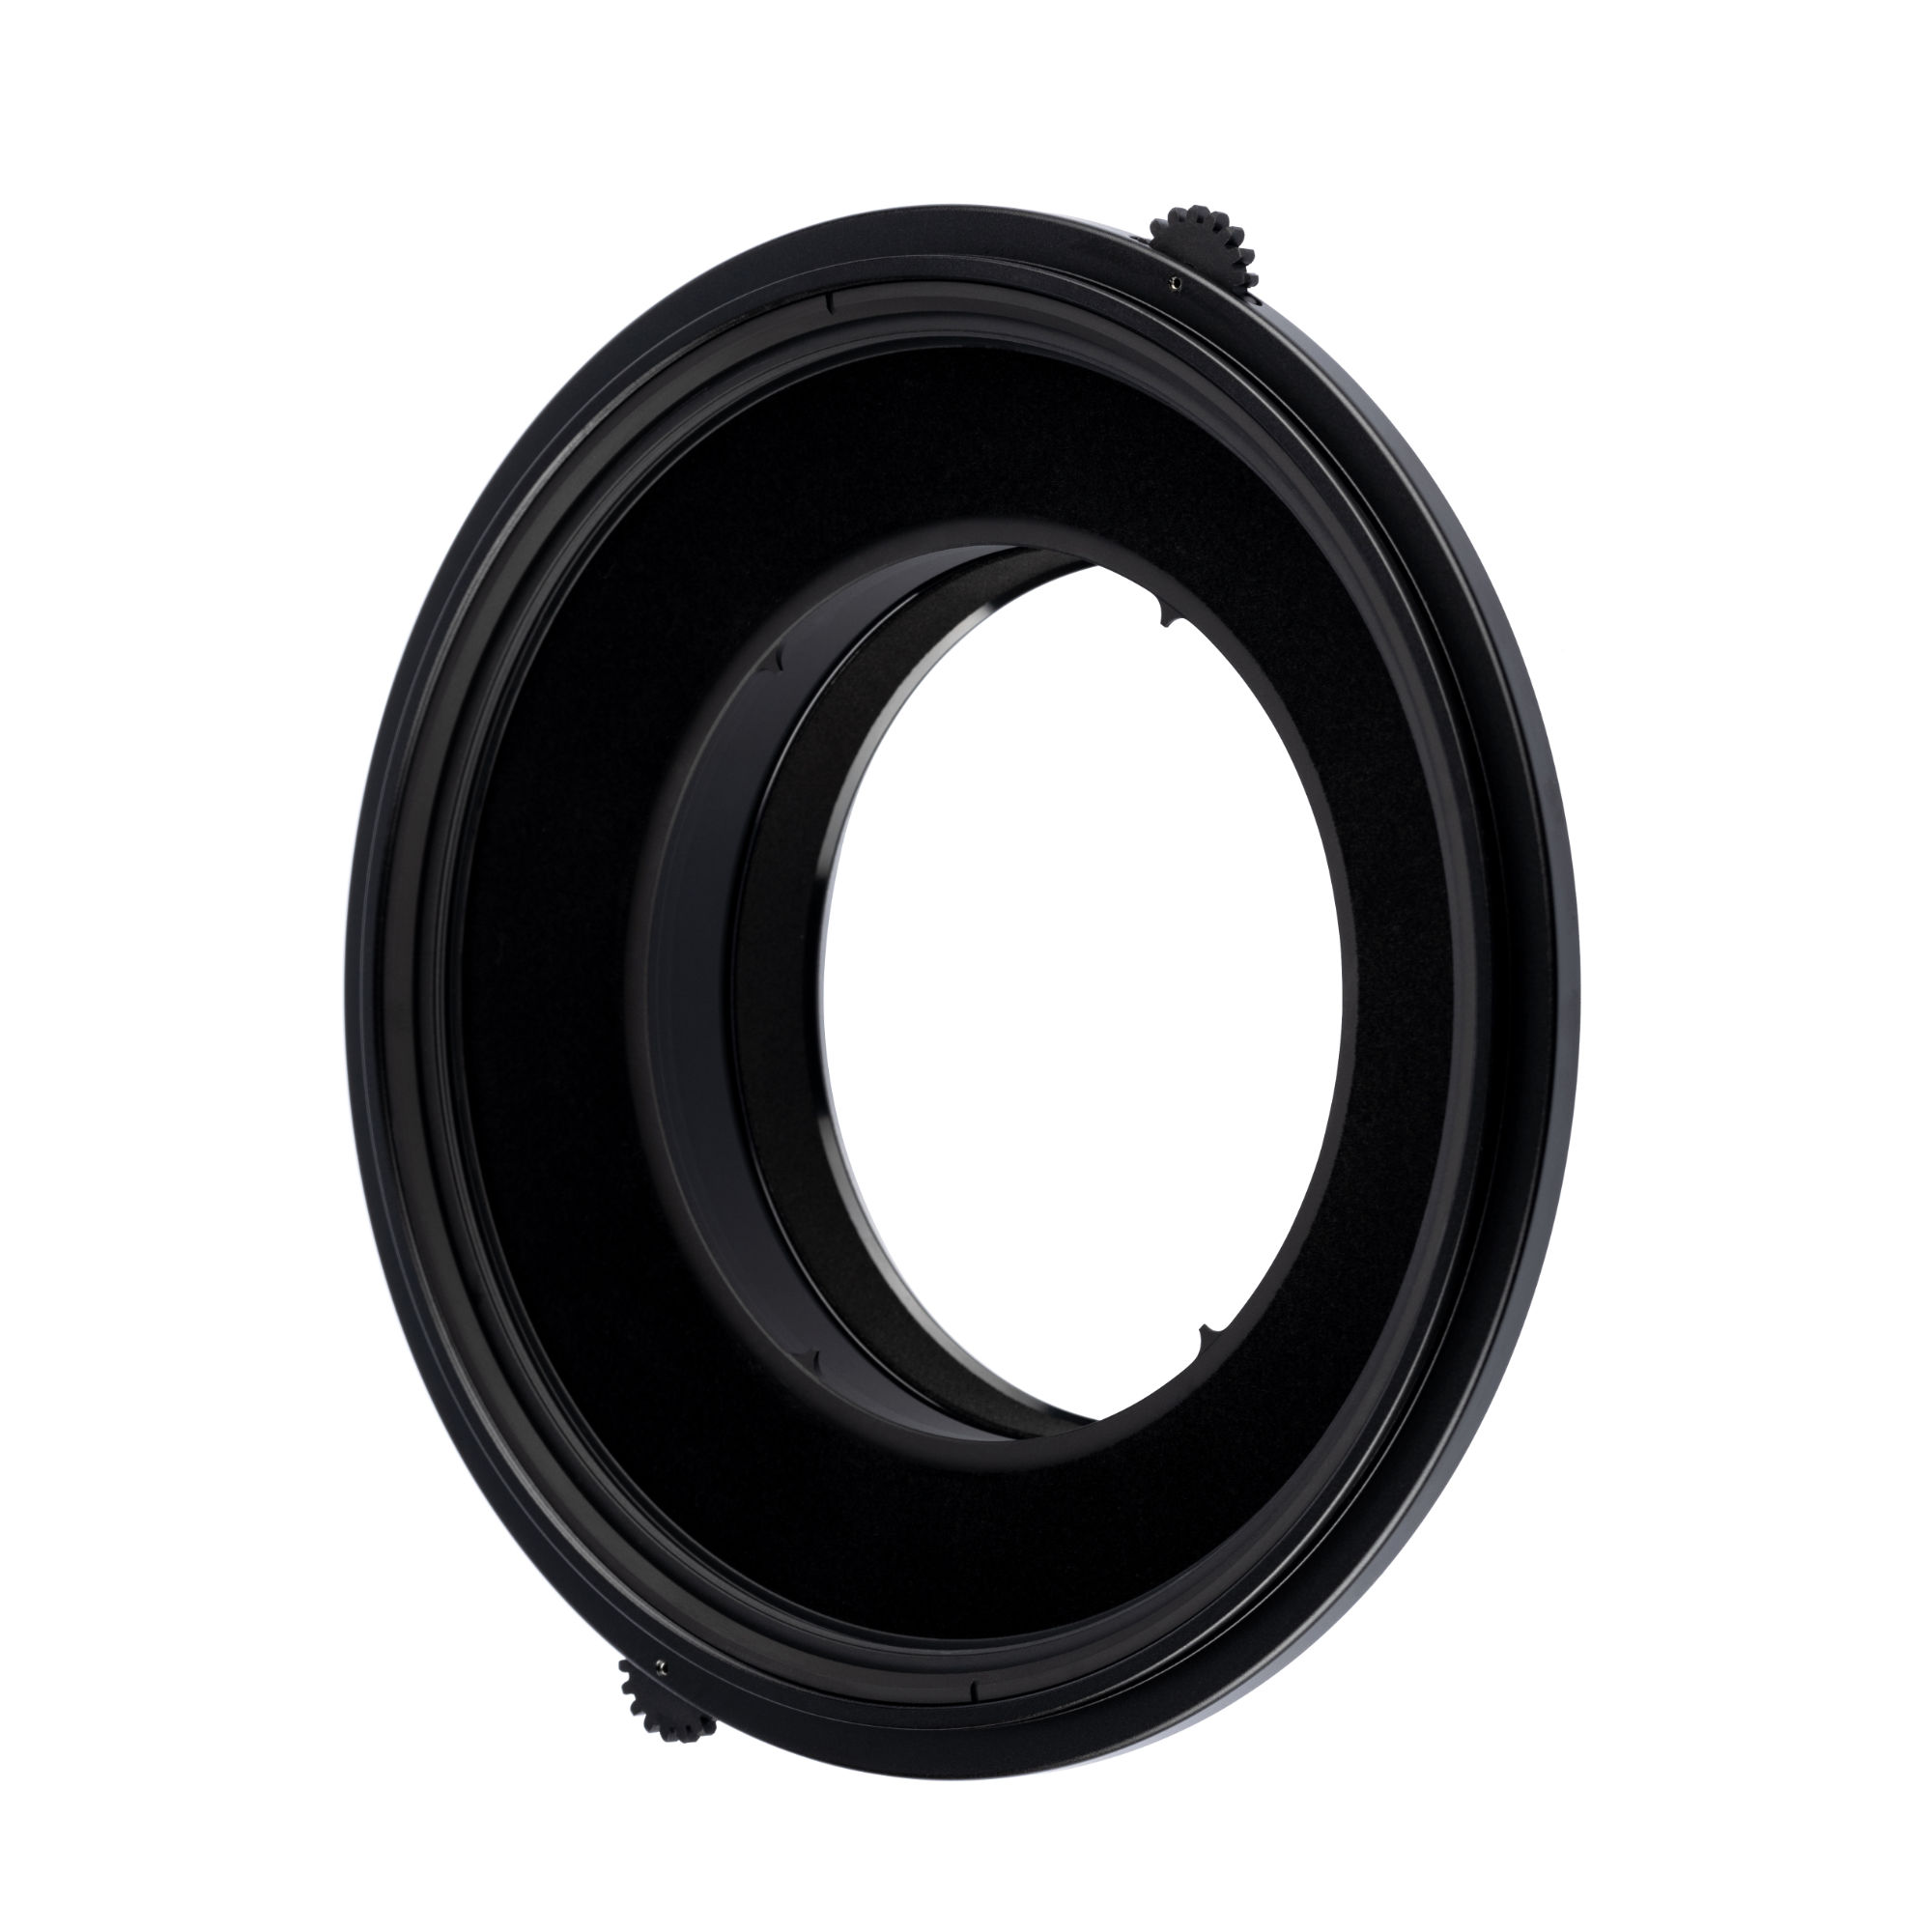 NiSi S6 150mm Filter Holder Kit with True Color NC CPL for Sony FE 